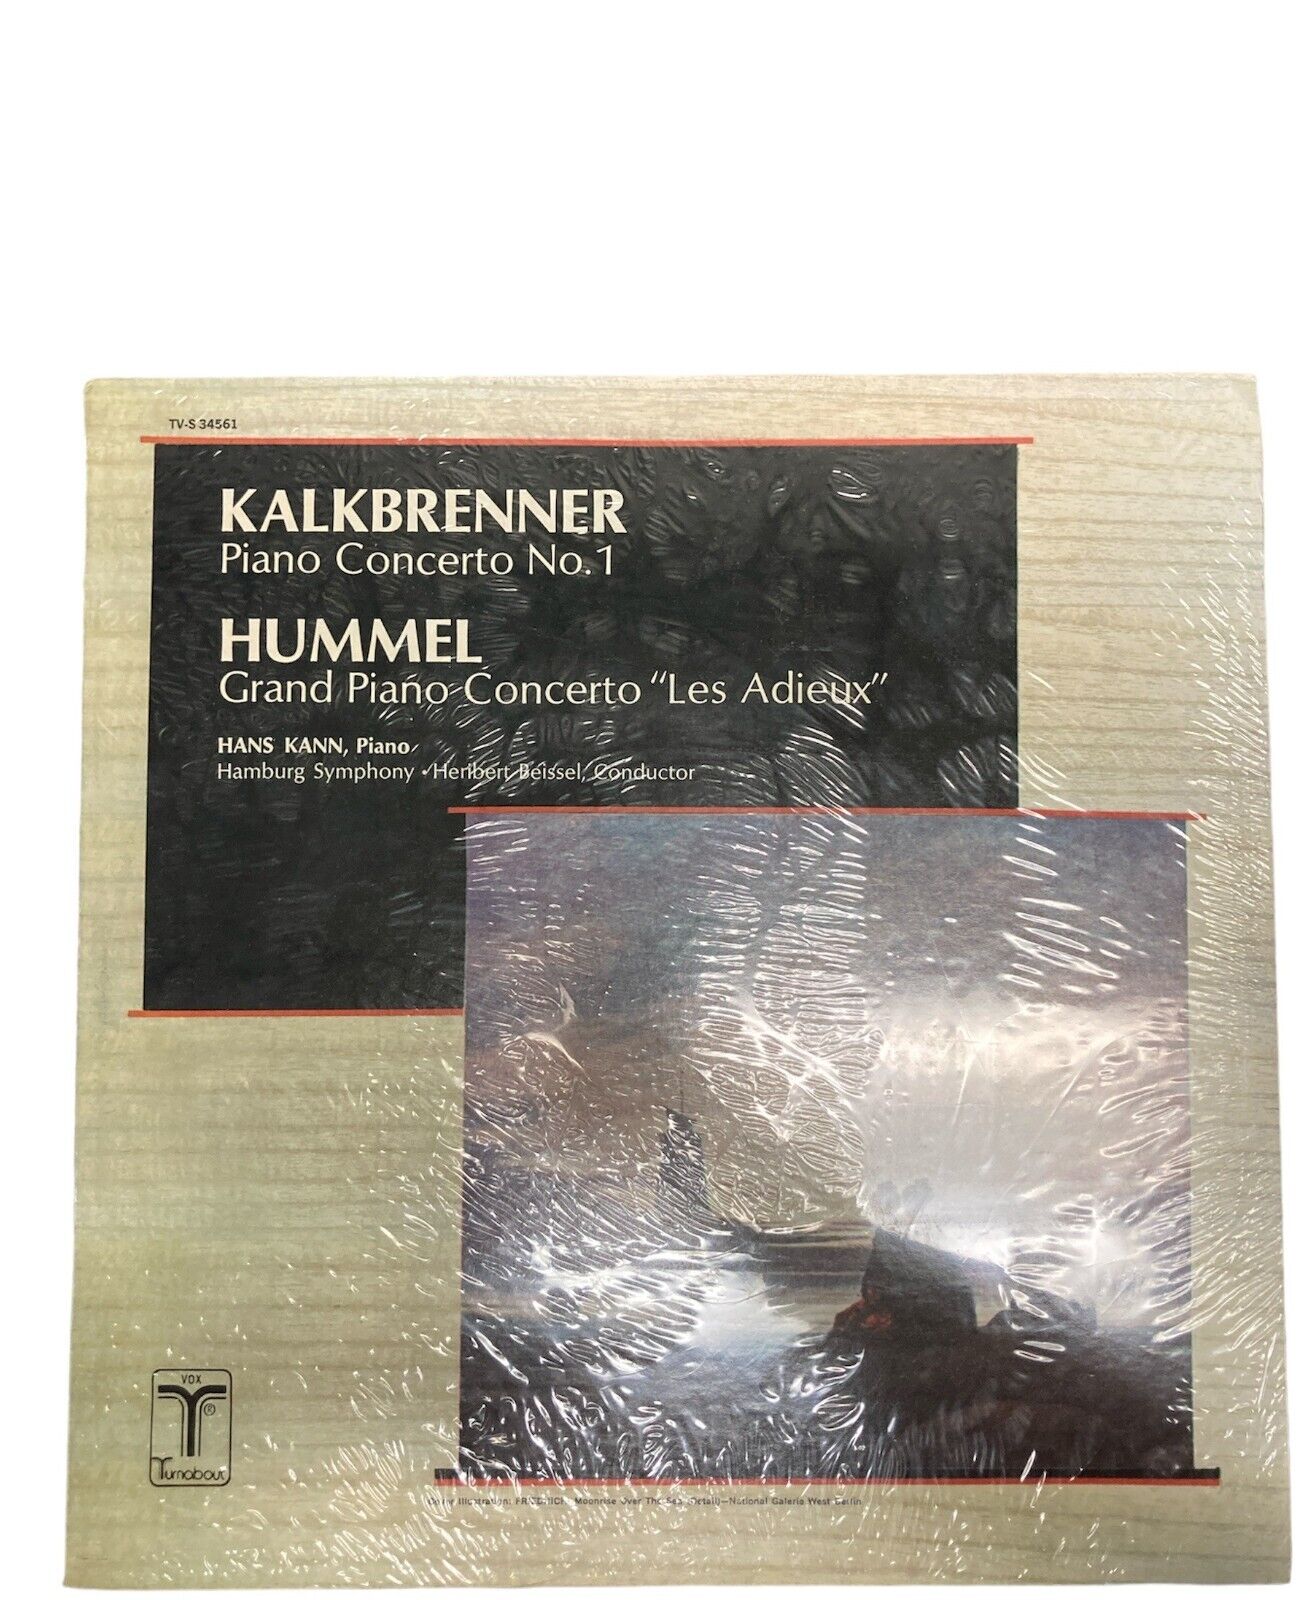 NEW! Kalkbrenner - Piano Concerto No. 1 Hummel Les Adieux~Turnabout -TV-S 34561